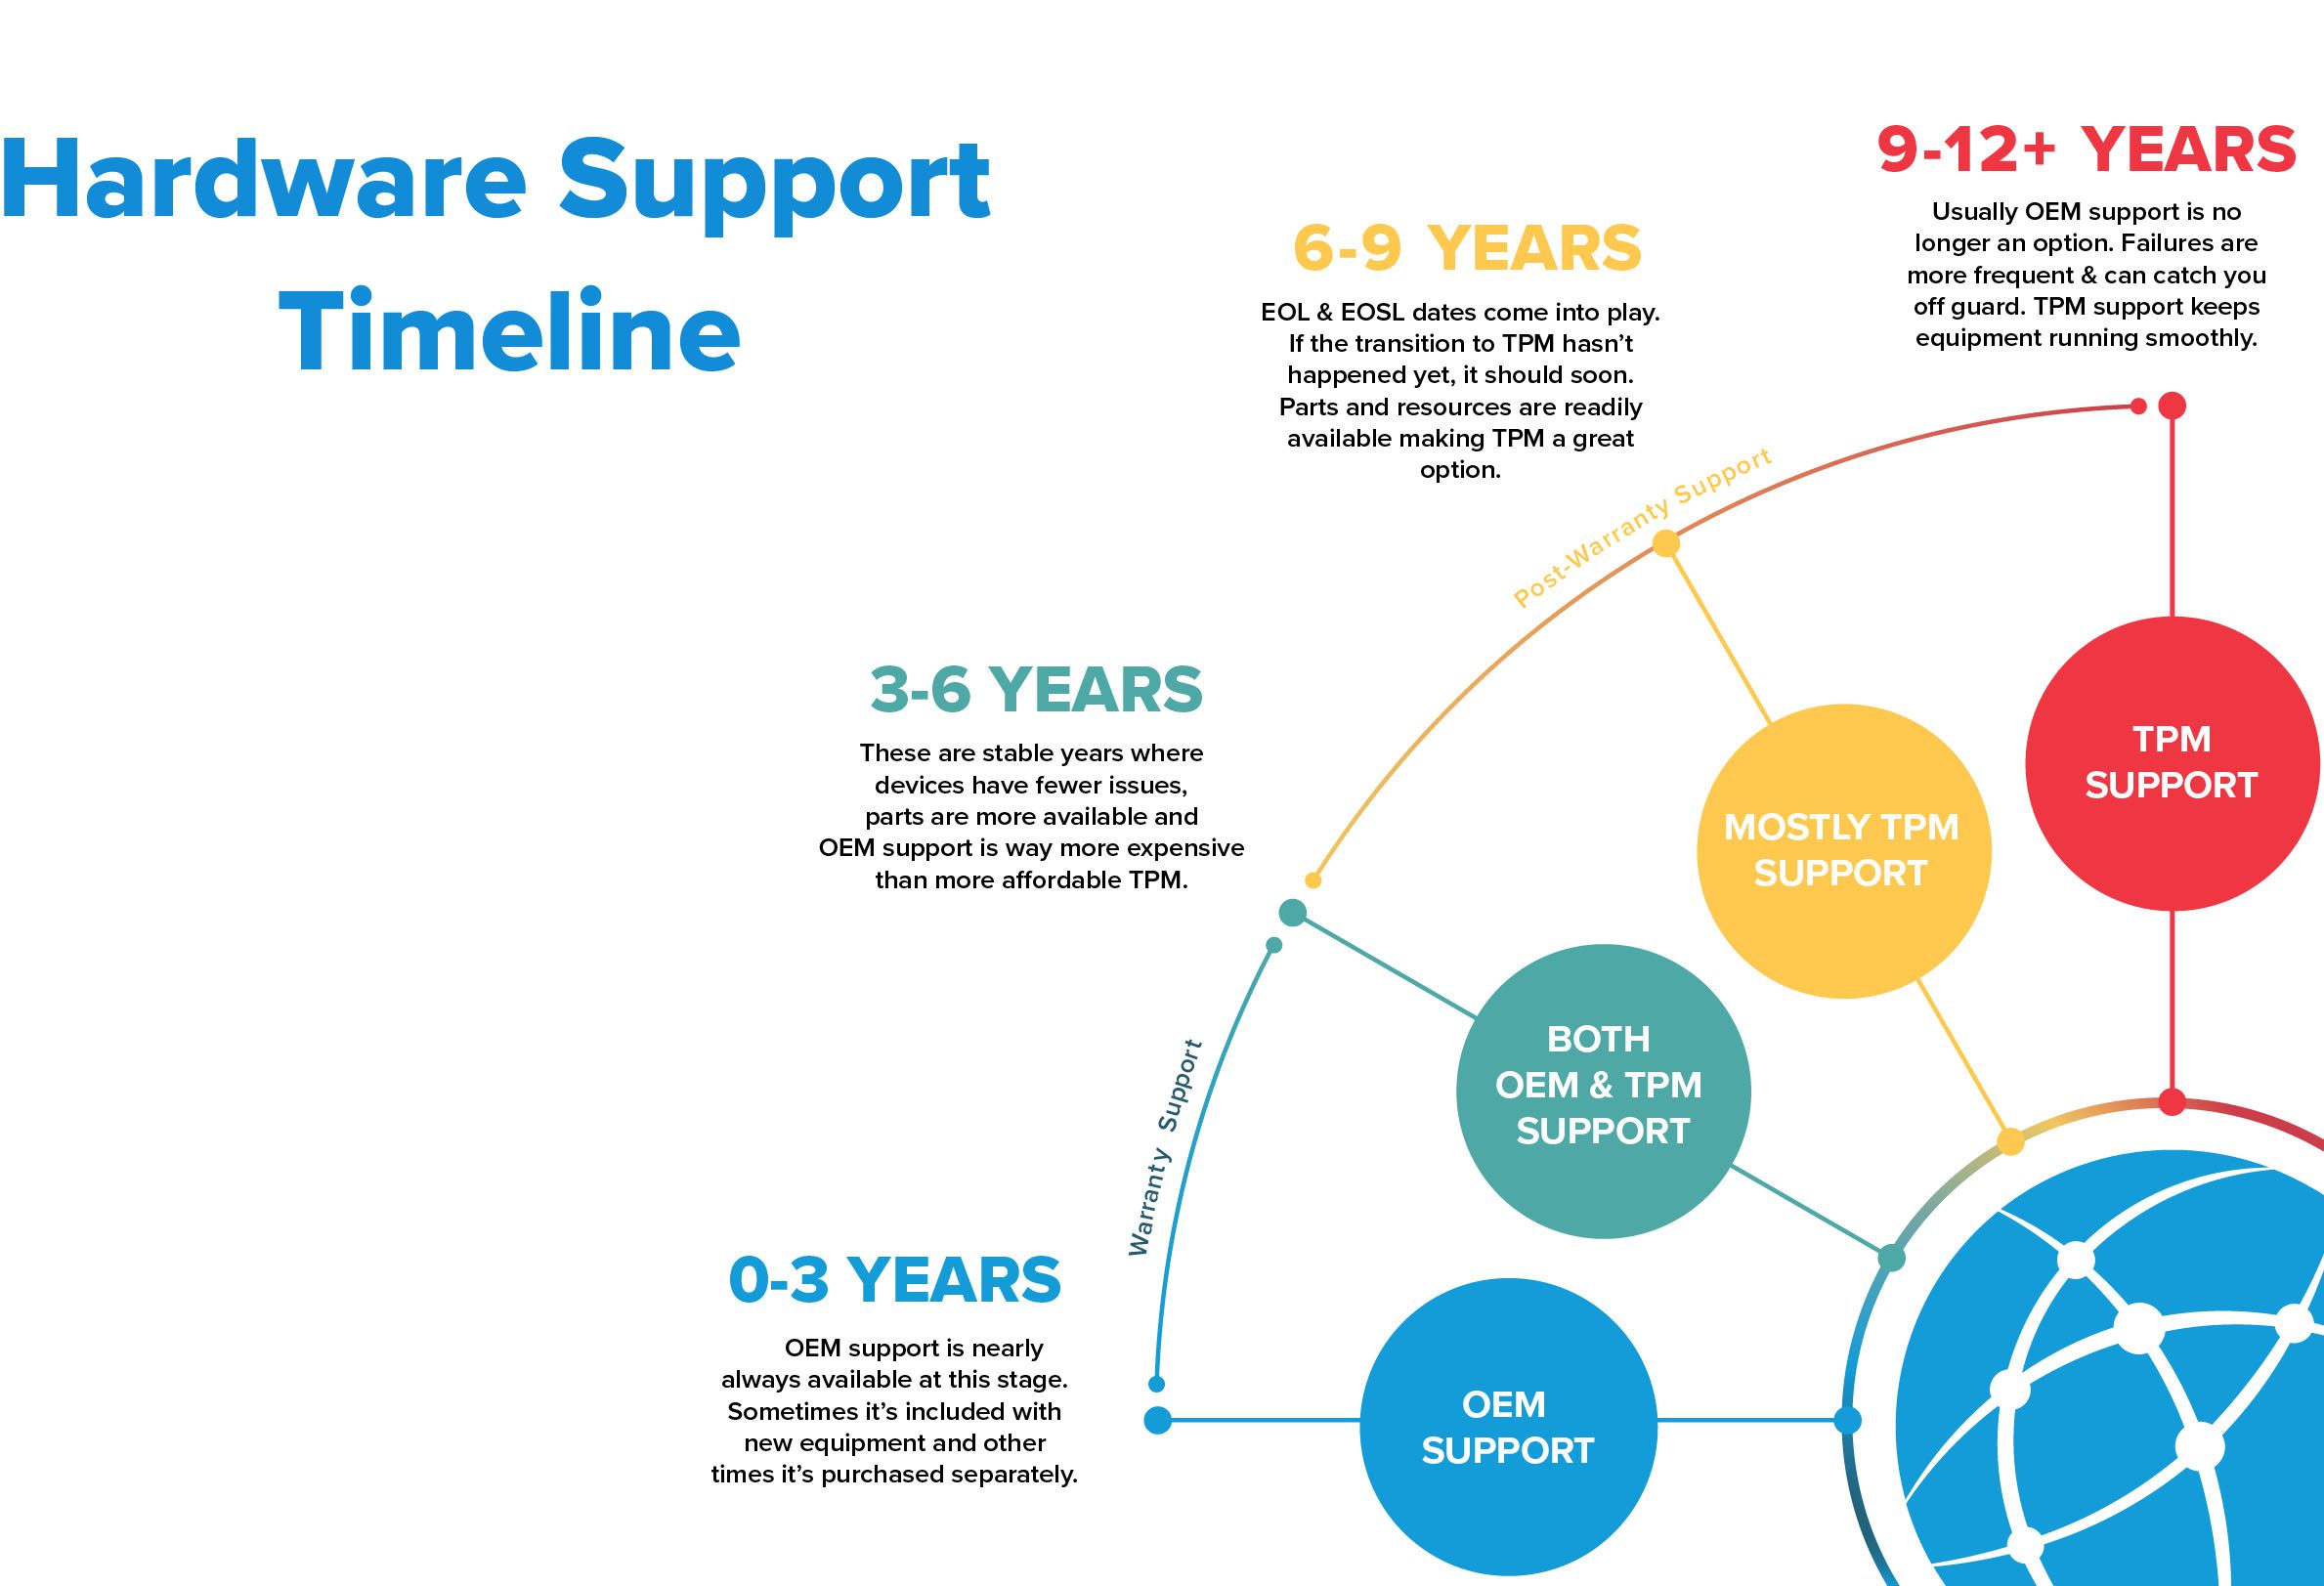 Hardware support timeline showing OEM support from 0-3 years, both OEM & TPM support from 3-6 years, mostly TPM support from 6-9 years and TPM support from 9-12 years and beyond